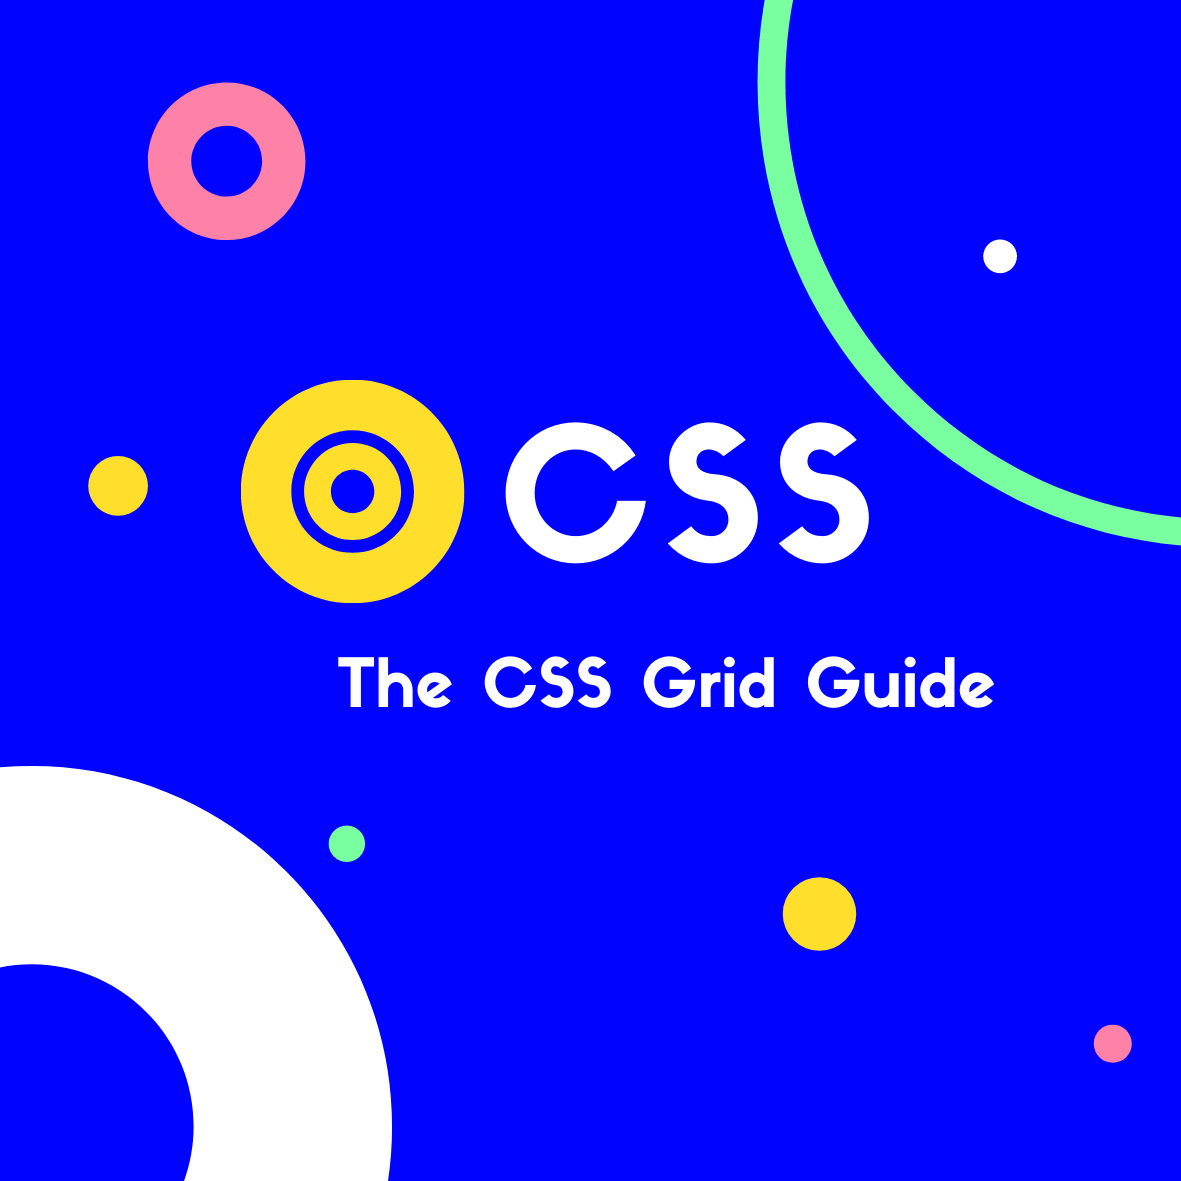 The CSS Grid Guide